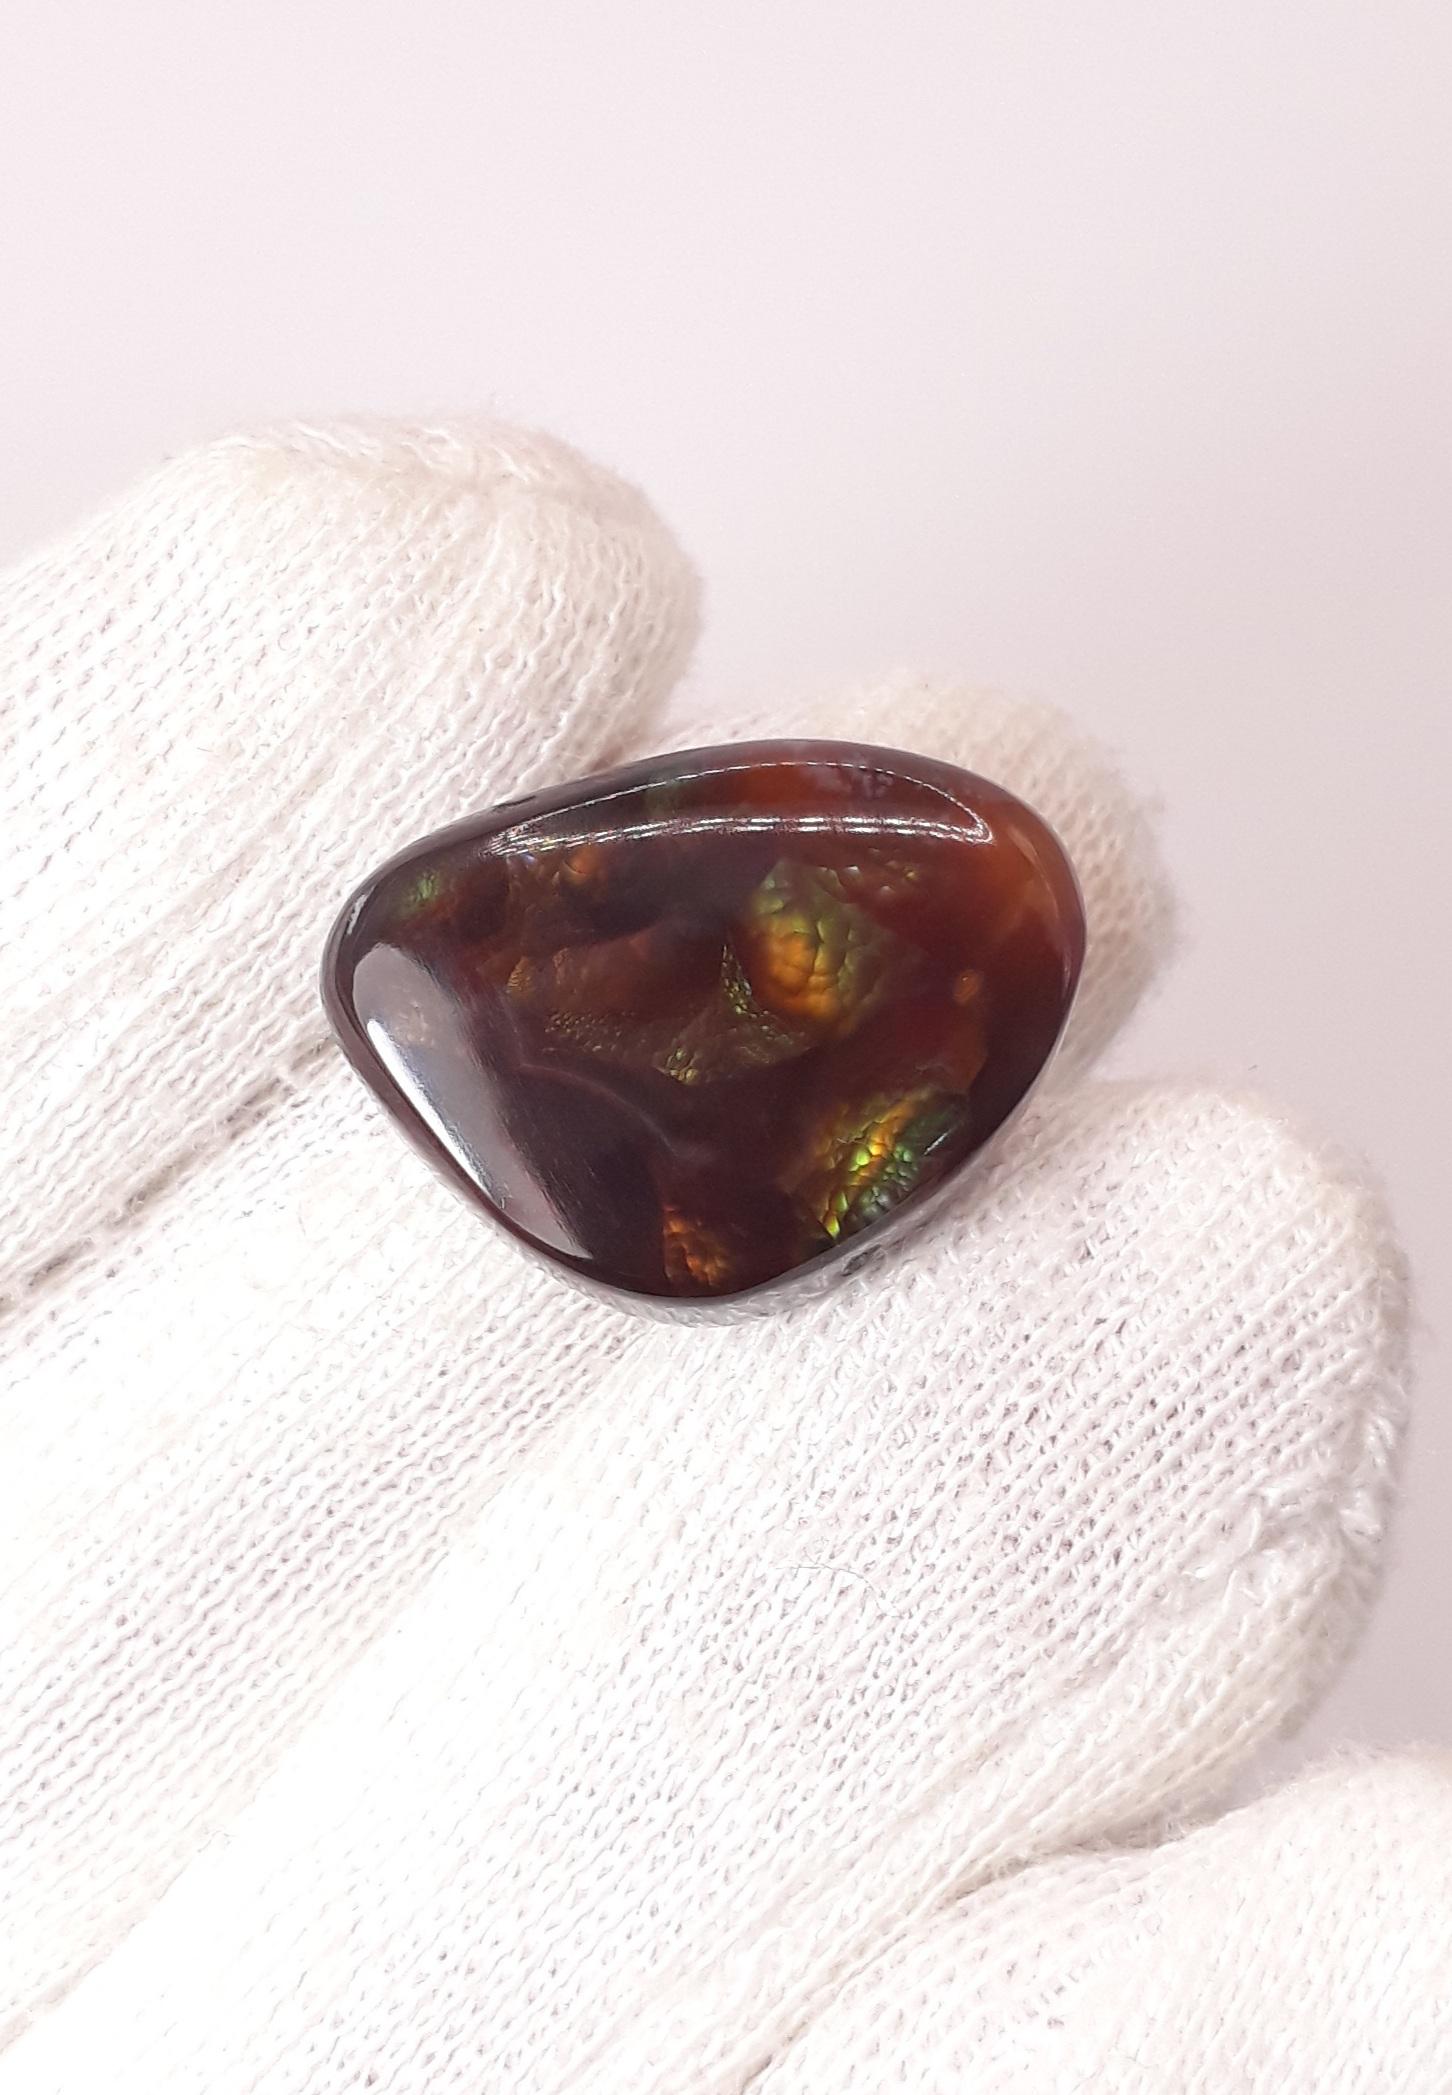 20ct Fire agate Loose cabochon - Rainbow Fire Agate - Mexican Fire Agate,  Rare Fire Agate - Rare Gemstone than Diamonds, Dimensions - 22x16.5mm